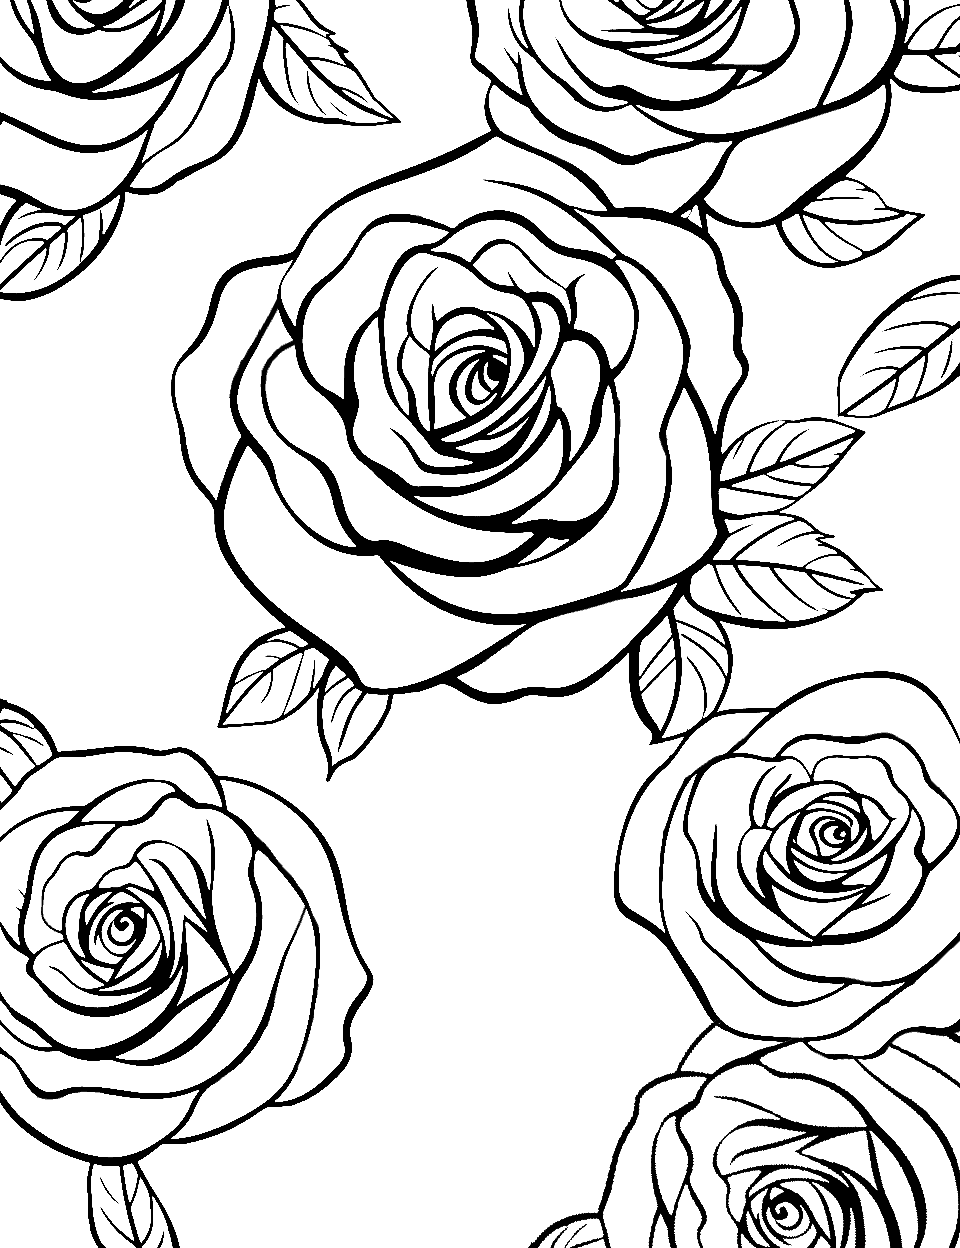 Floral Pattern with Roses Coloring Page - A repetitive pattern of big roses.